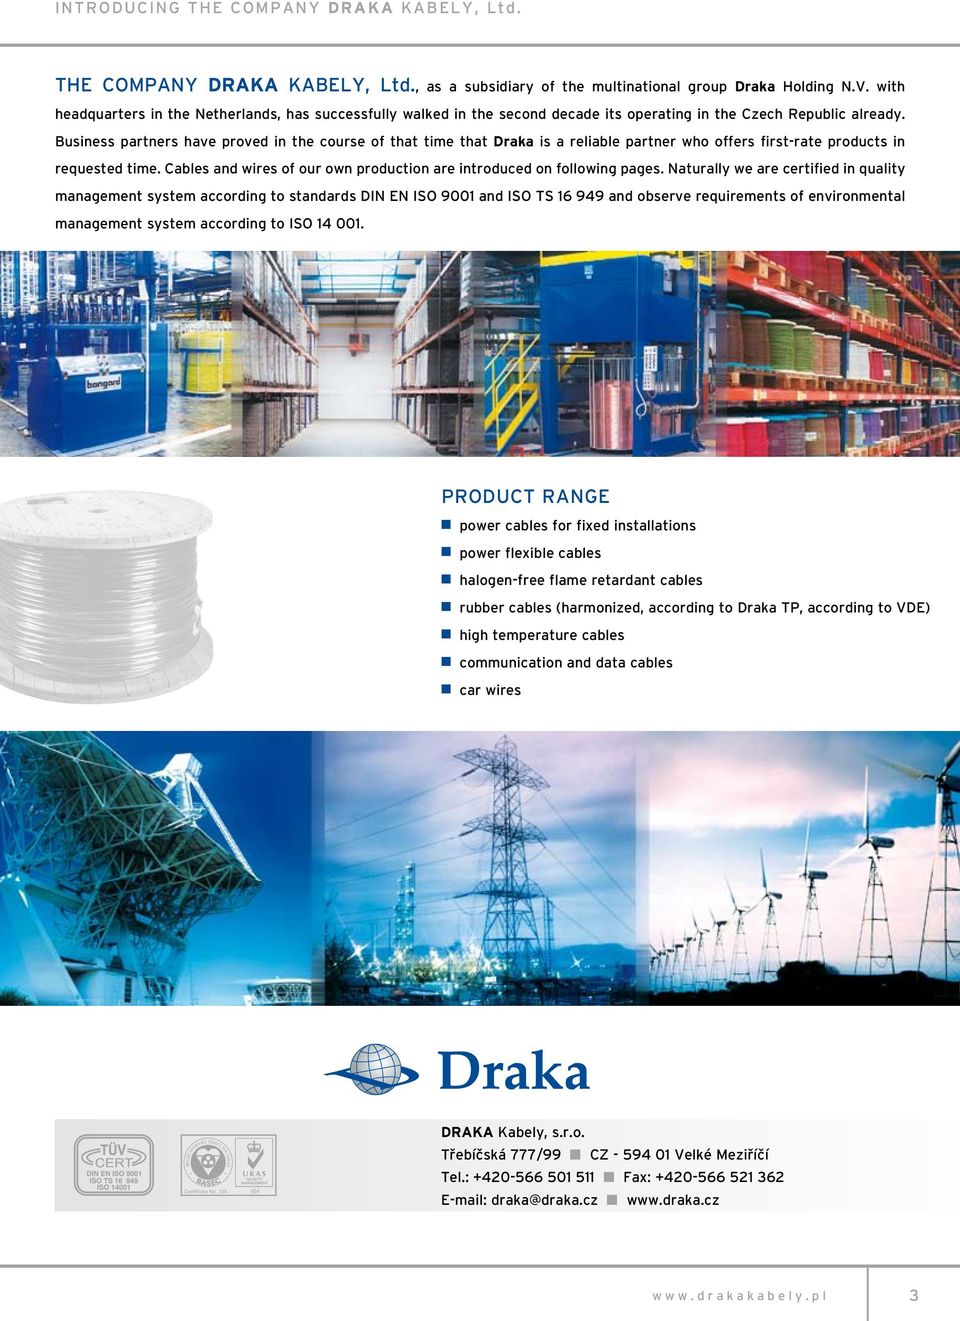 Business partners have proved in the course of that time that Draka is a reliable partner who offers first-rate products in requested time.